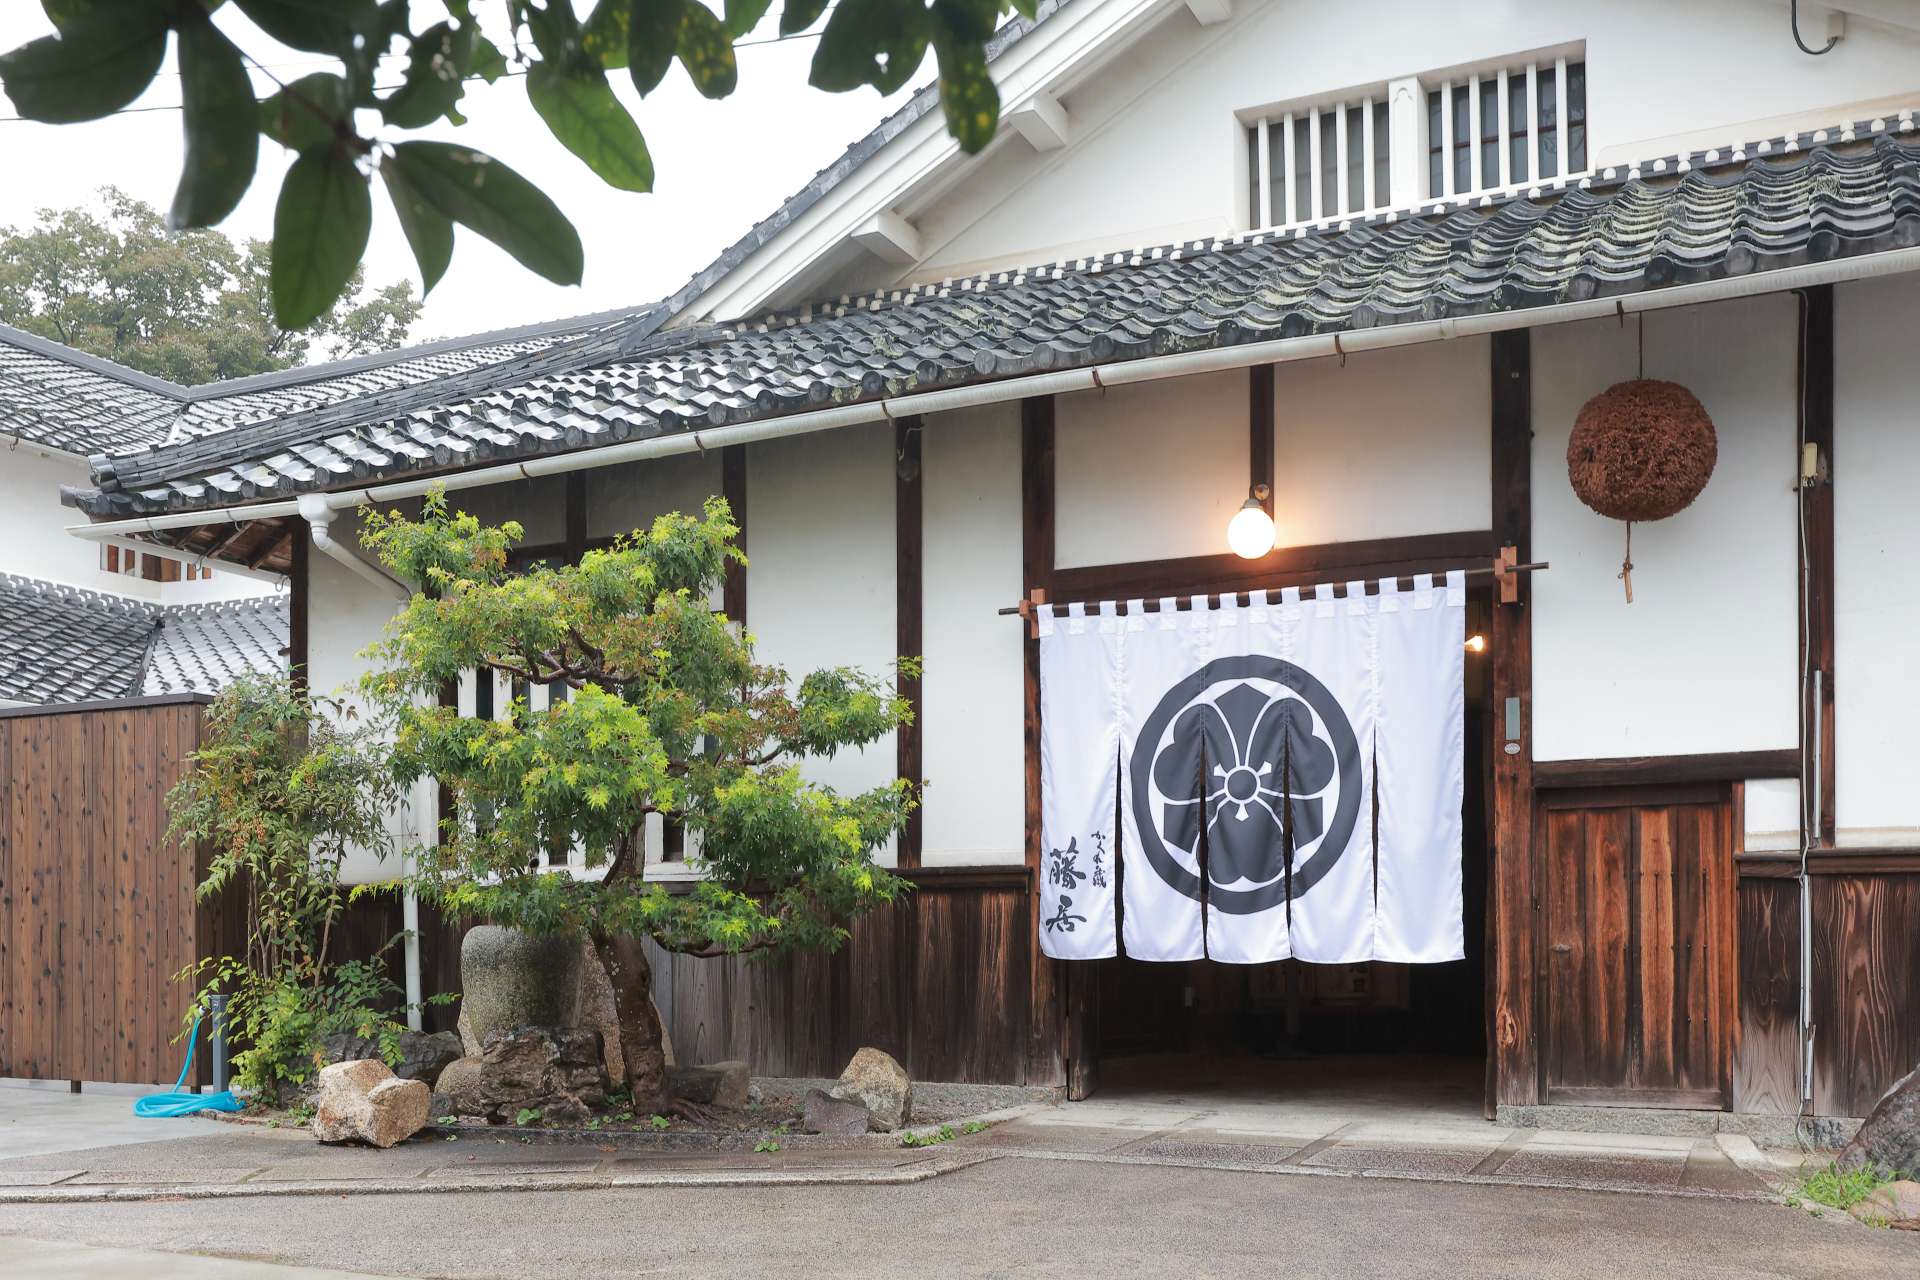 The sake brewery is designated in Japan as a Registered Tangible Cultural Property.